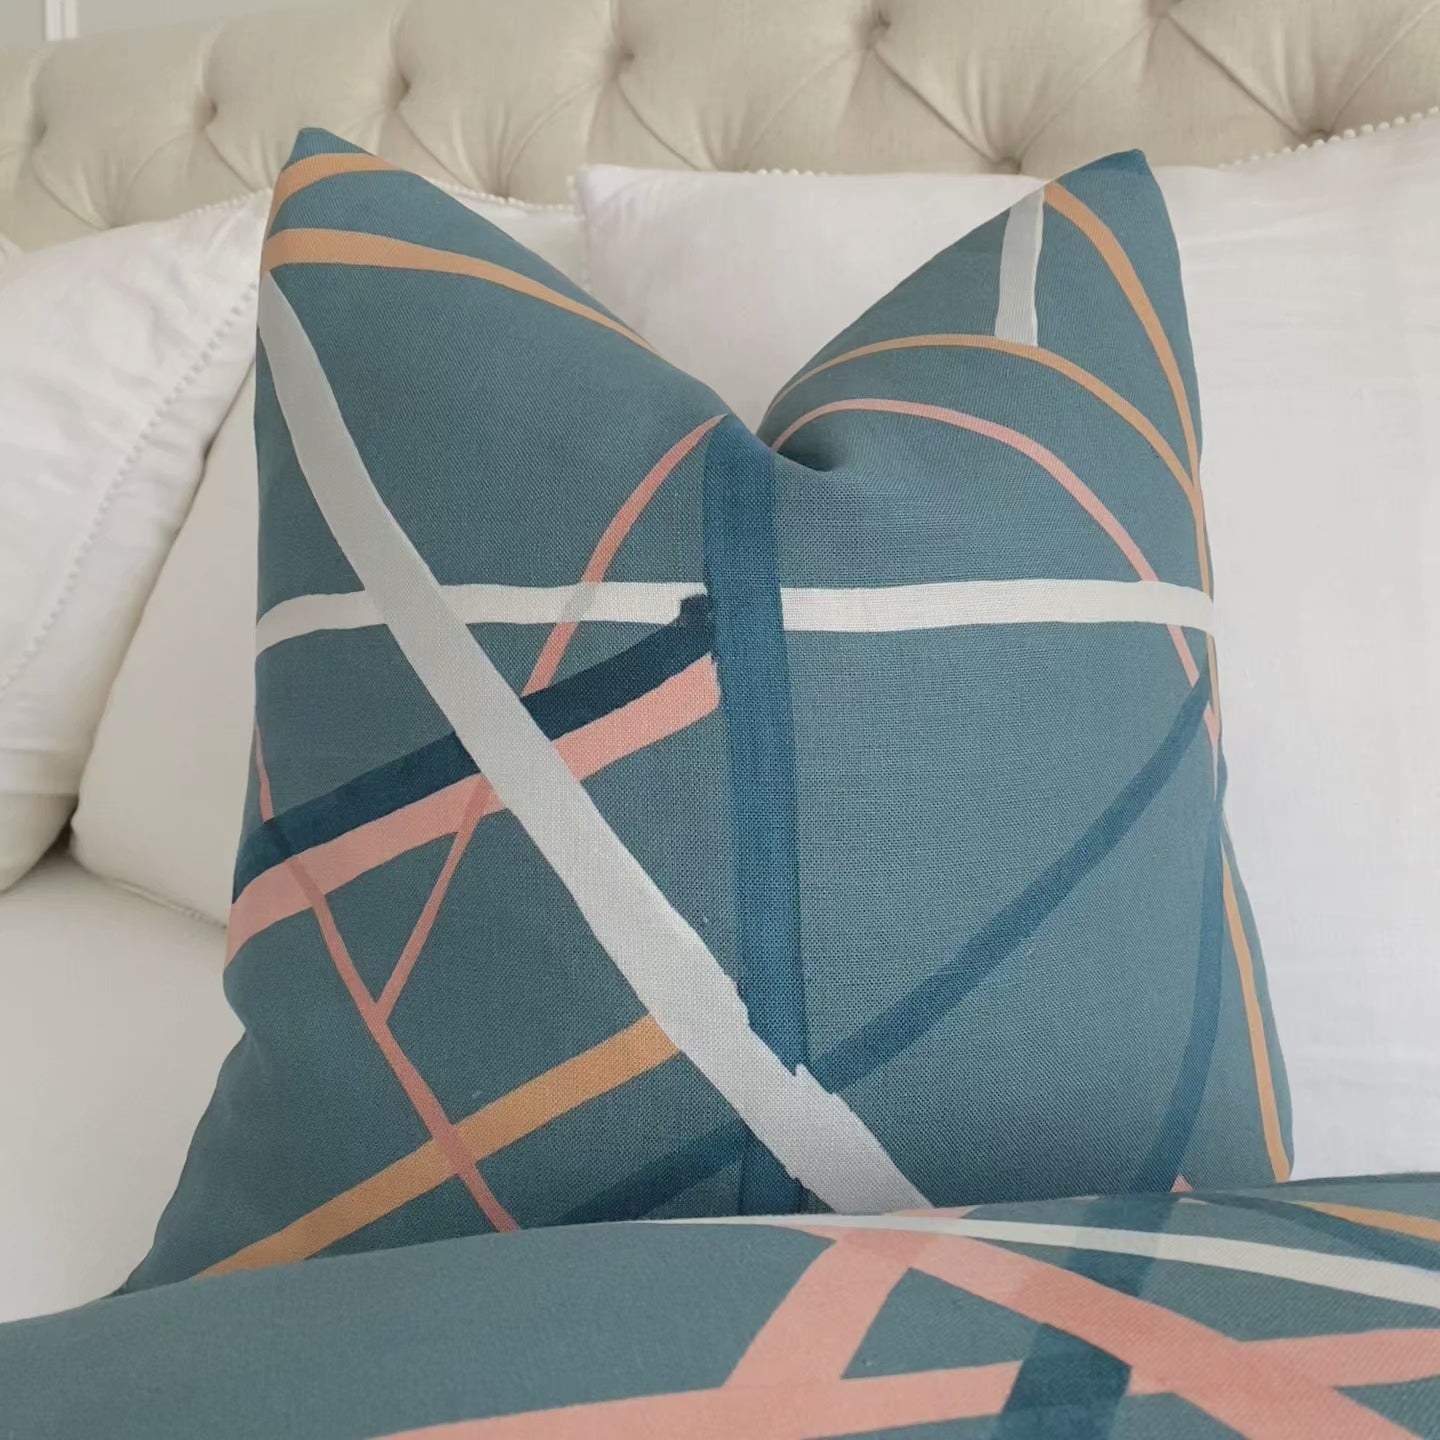 Kelly Wearstle Simpatico Teal Blue Striped Designer Decorative Throw Pillow Cover Product Video